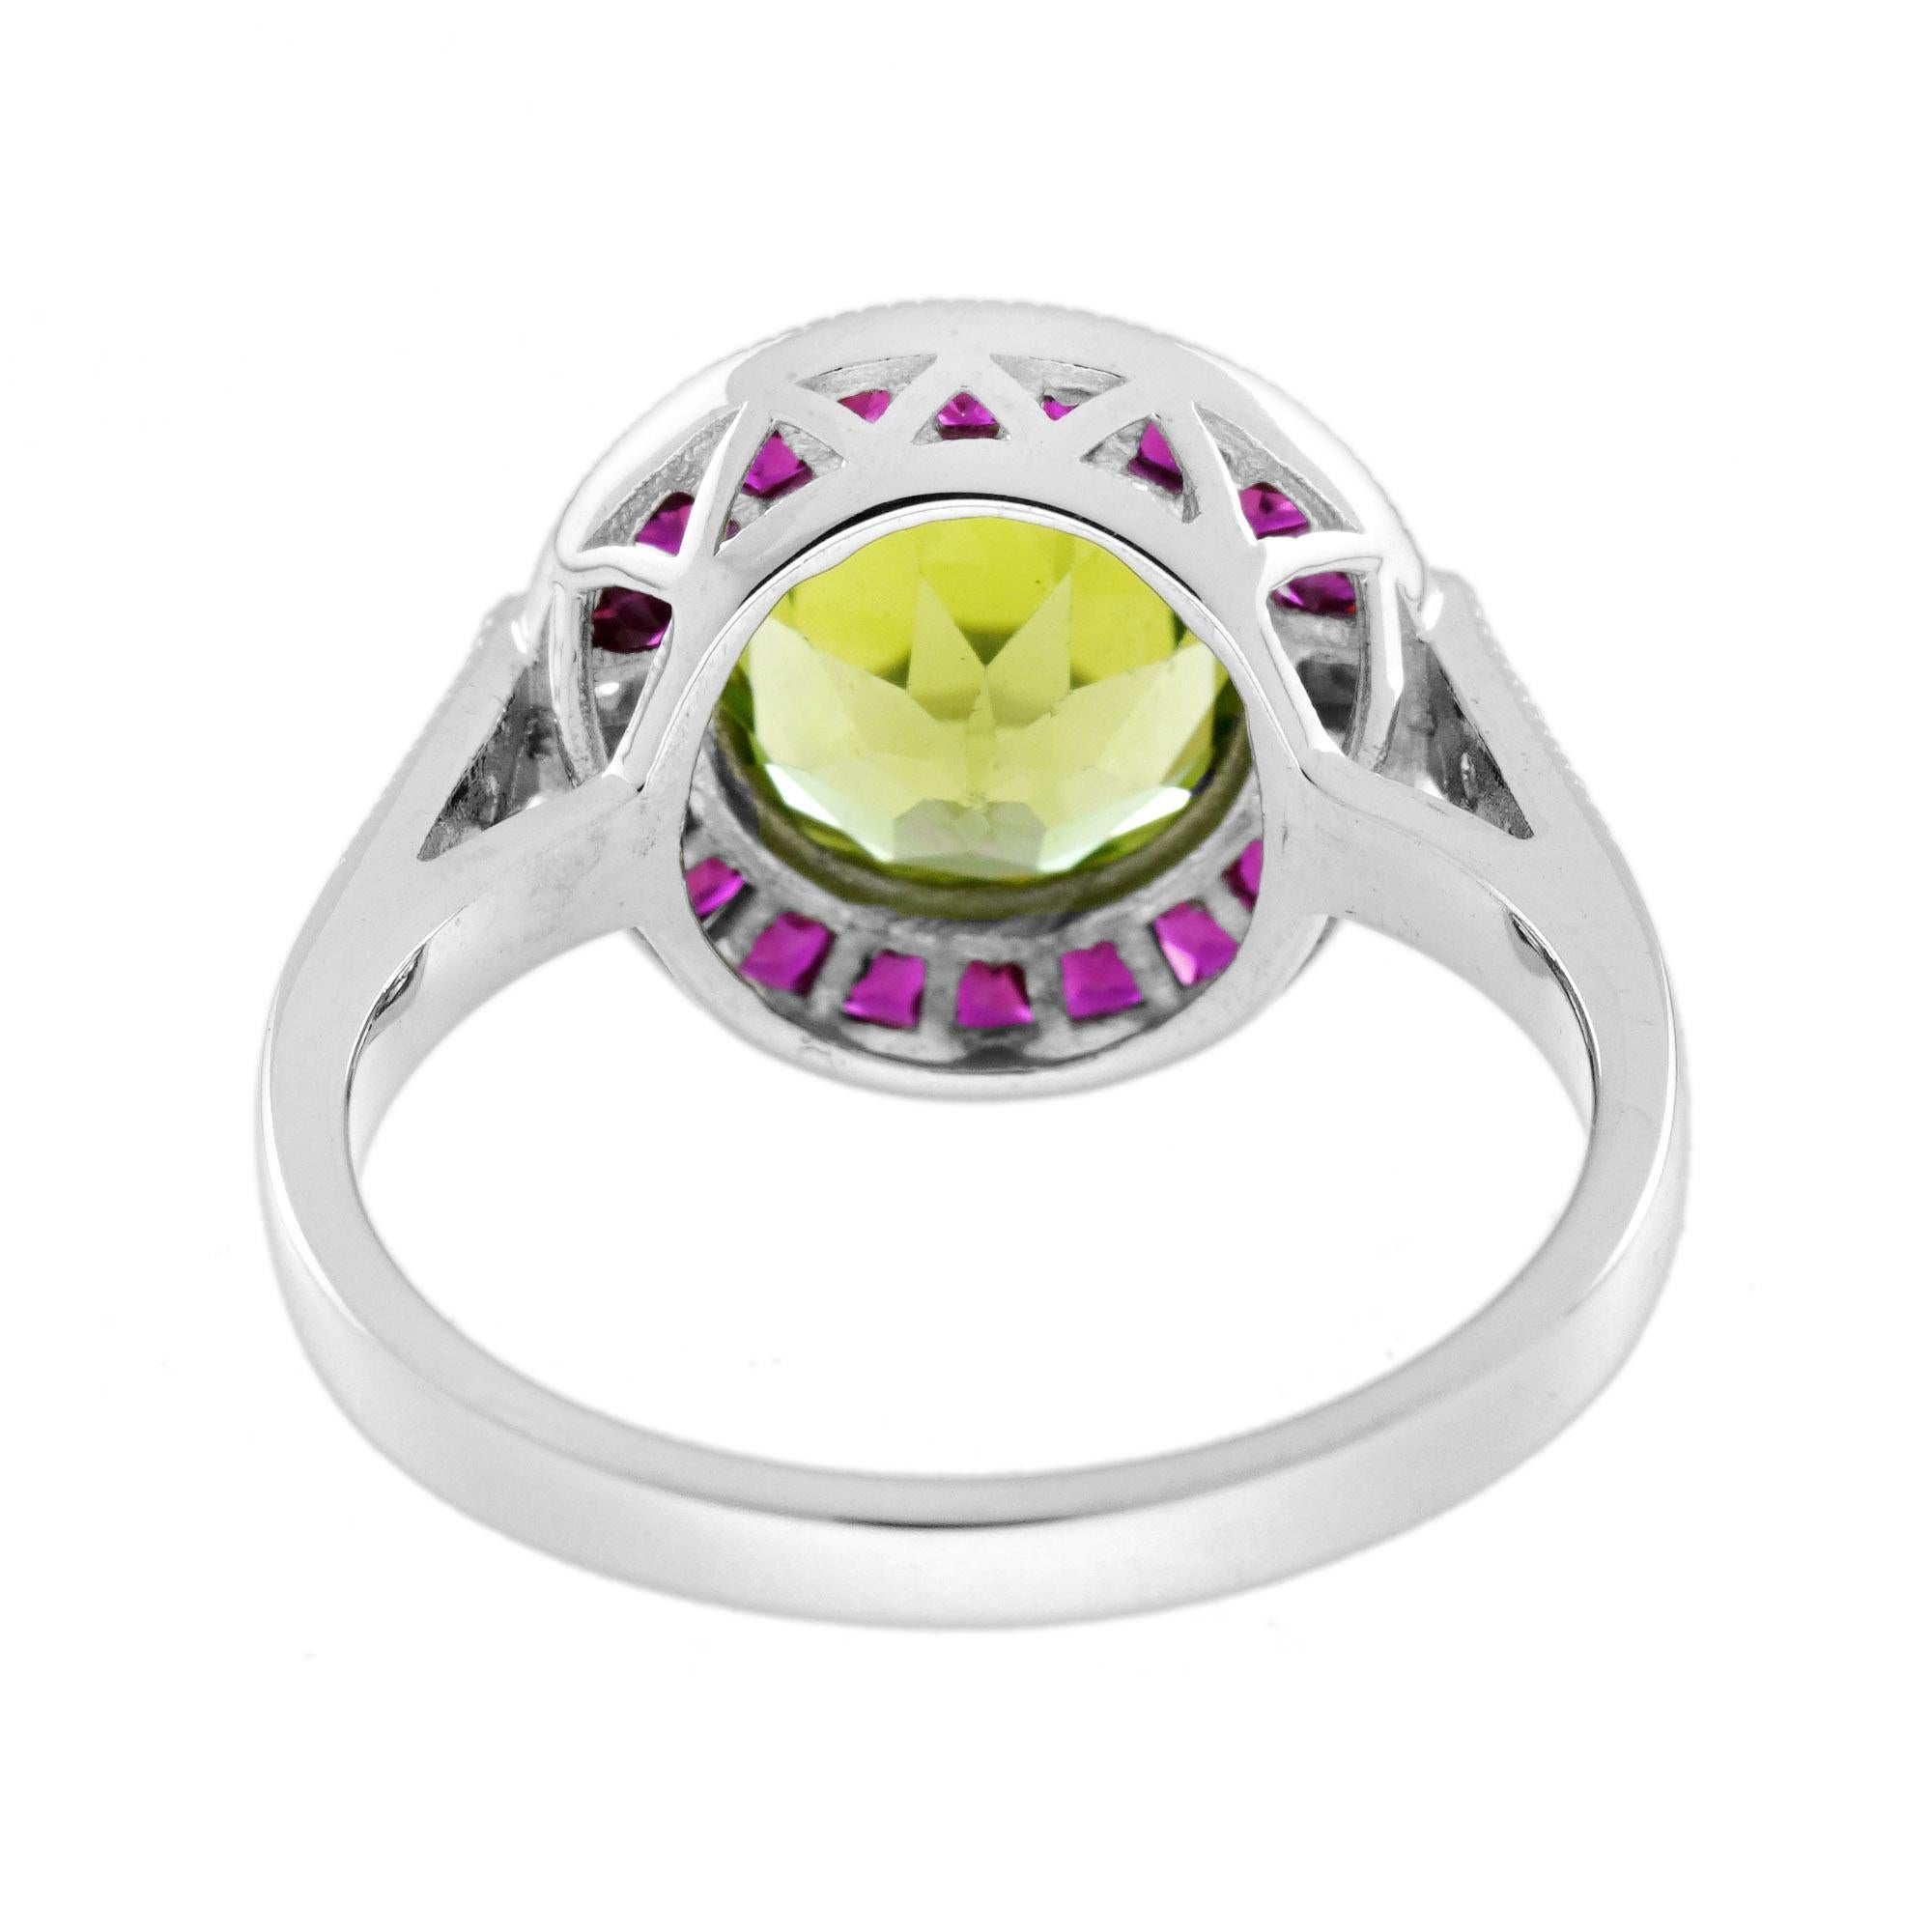 For Sale:  Peridot Ruby Diamond Art Deco Style Celebrate Target Ring in 14K White Gold 5